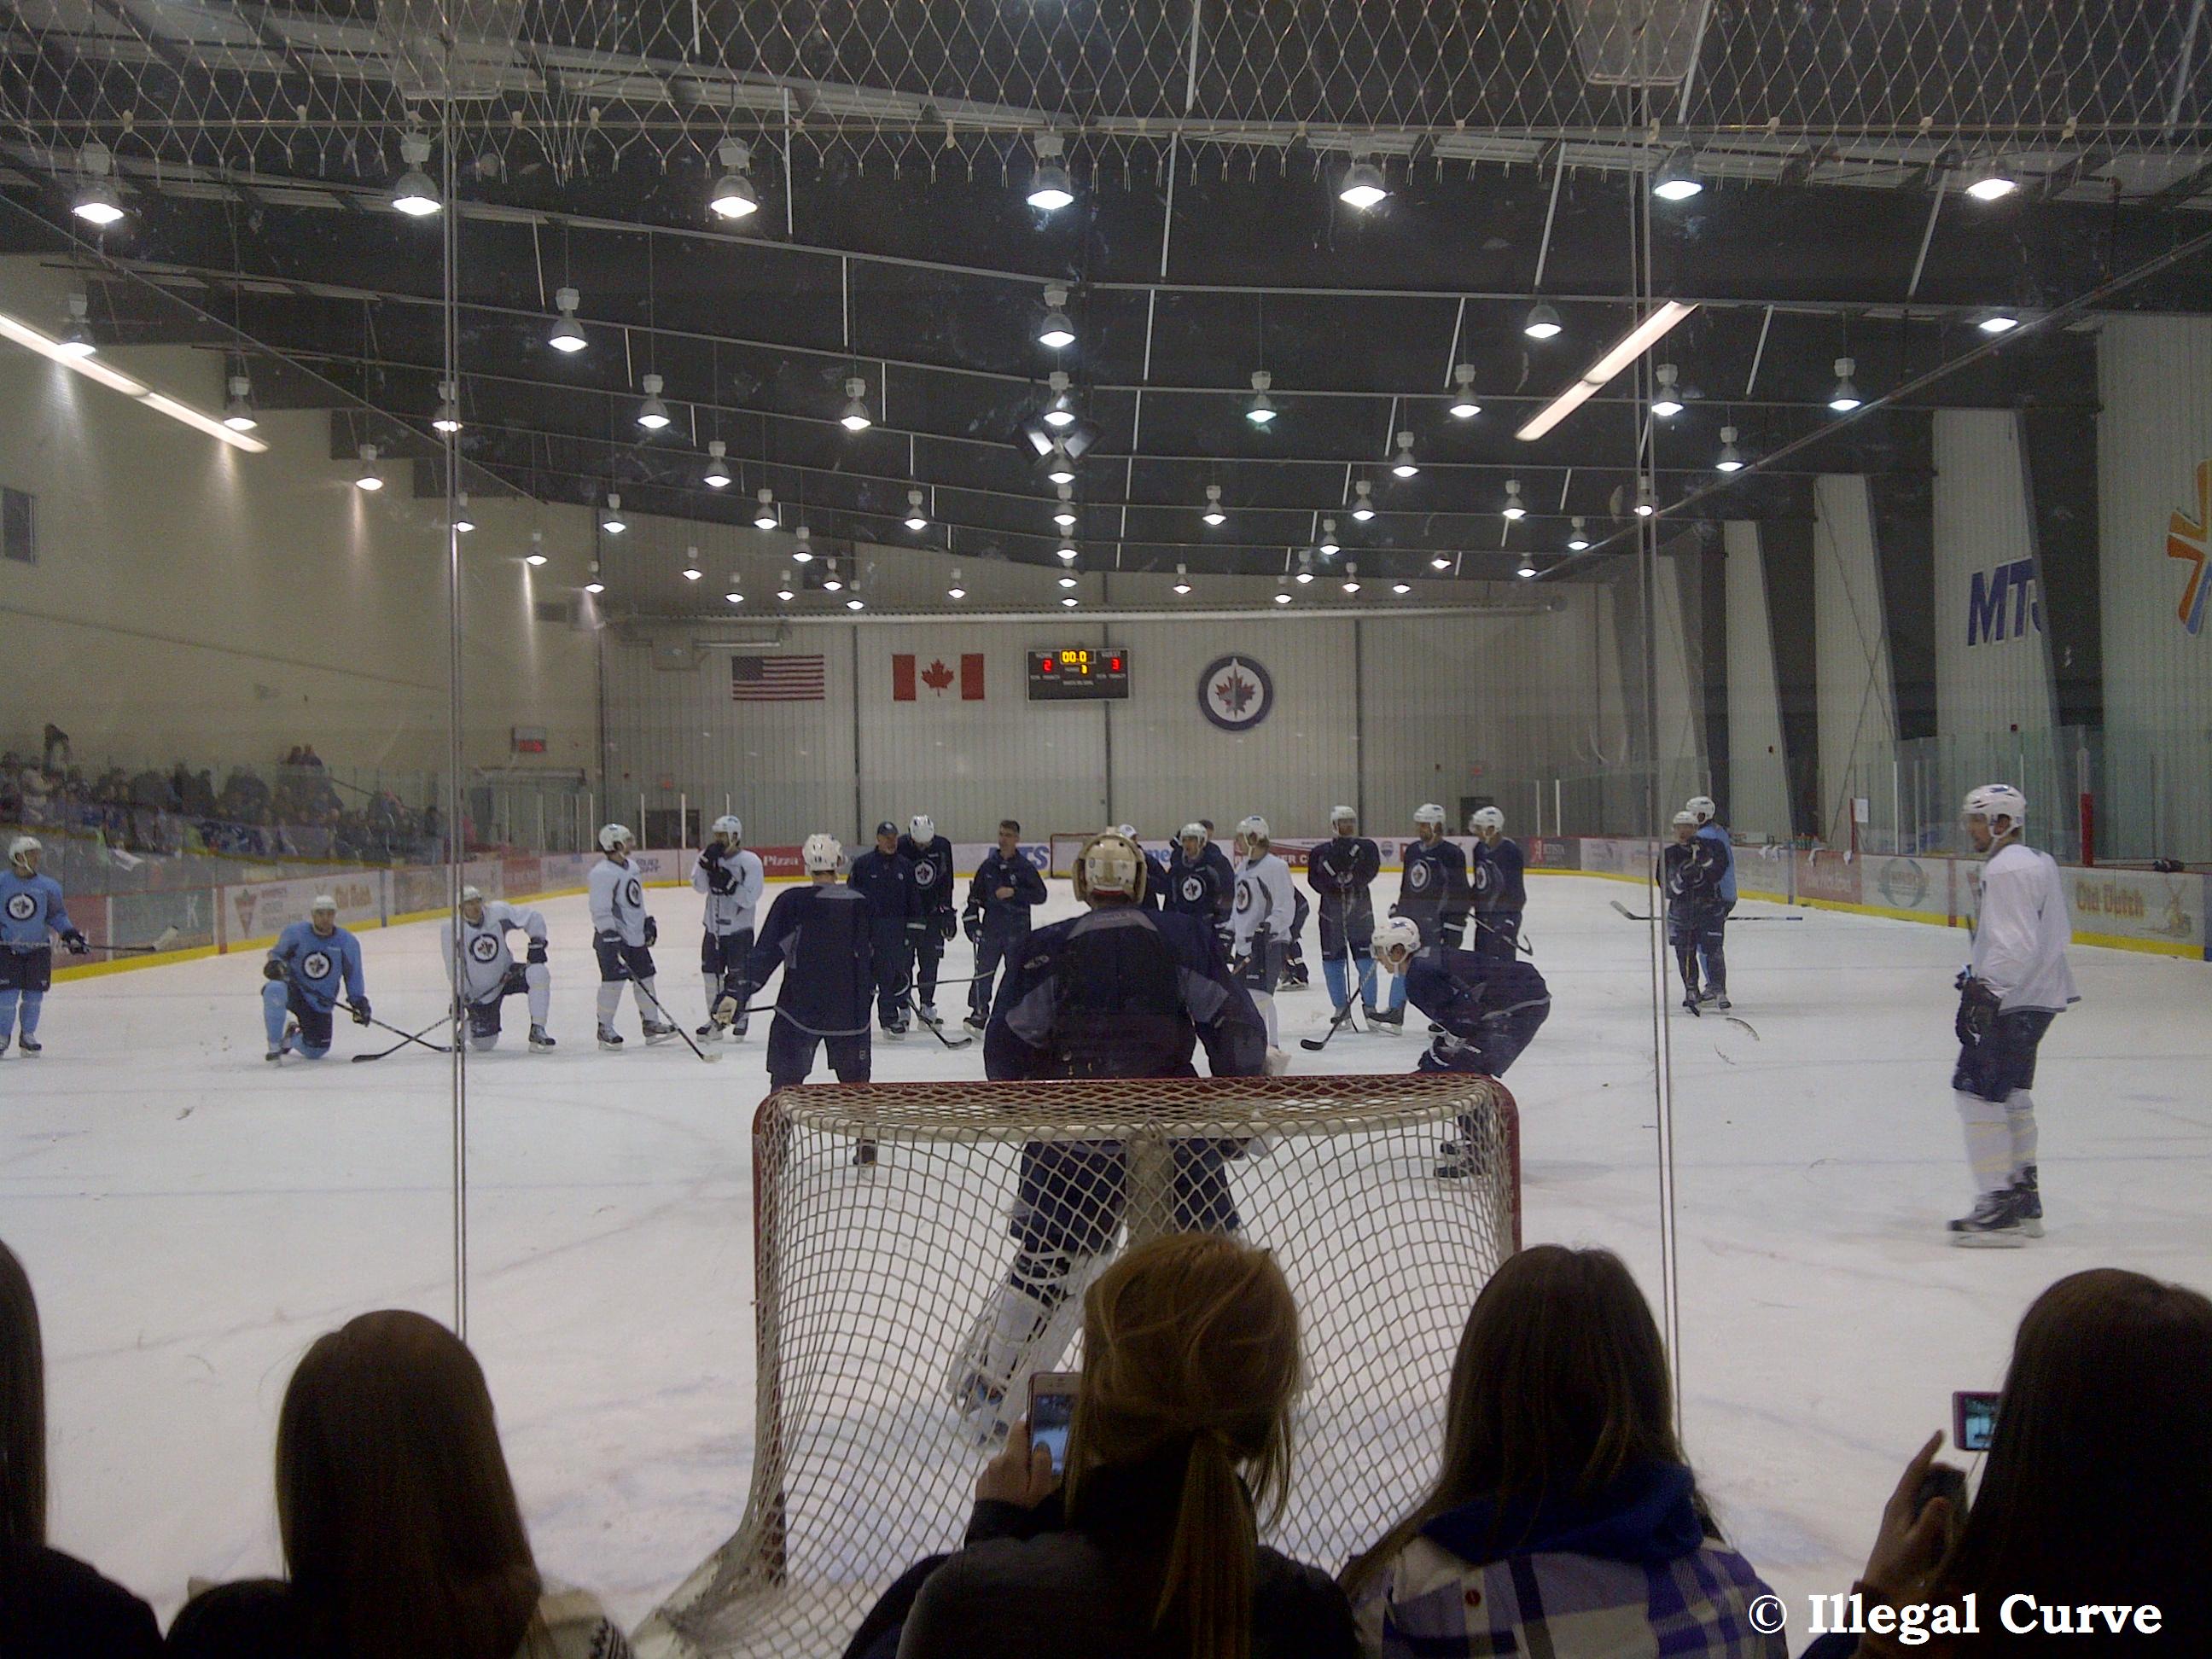 Jets practice March 13 20121